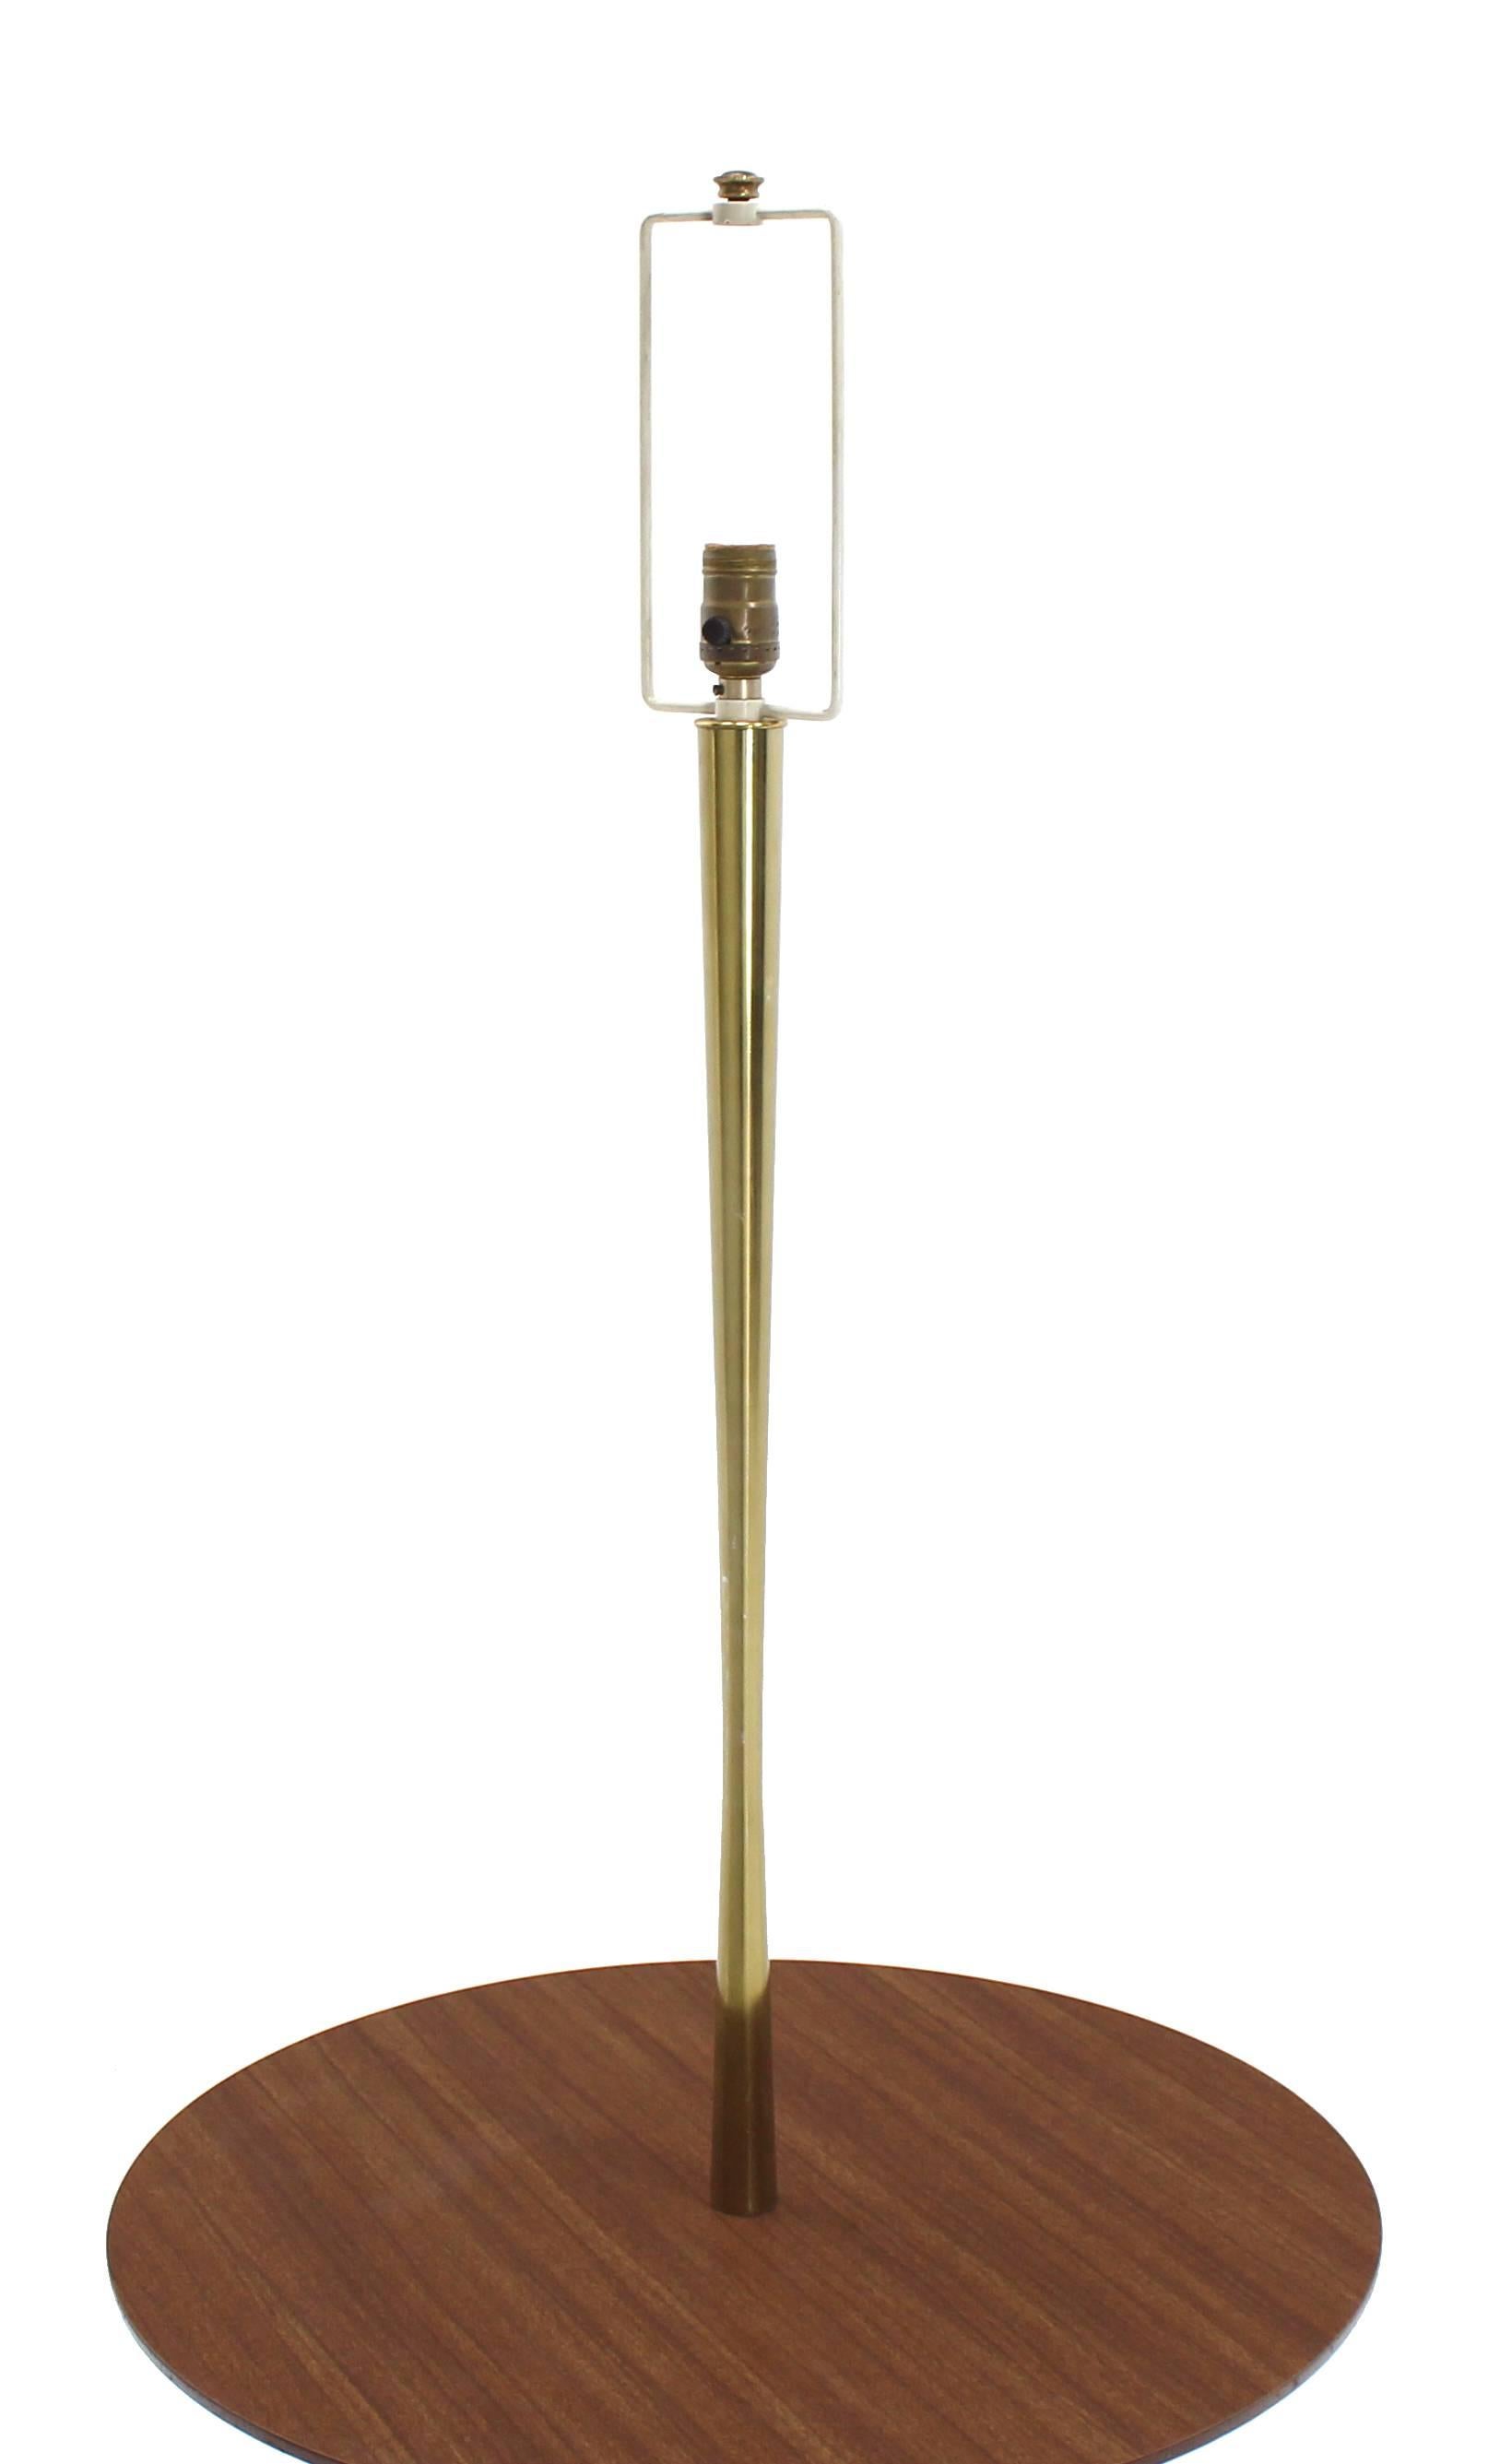 Mid Century Modern Sculptural Tri Leg Base Cast Metal Base Table Floor Lamp In Excellent Condition For Sale In Rockaway, NJ